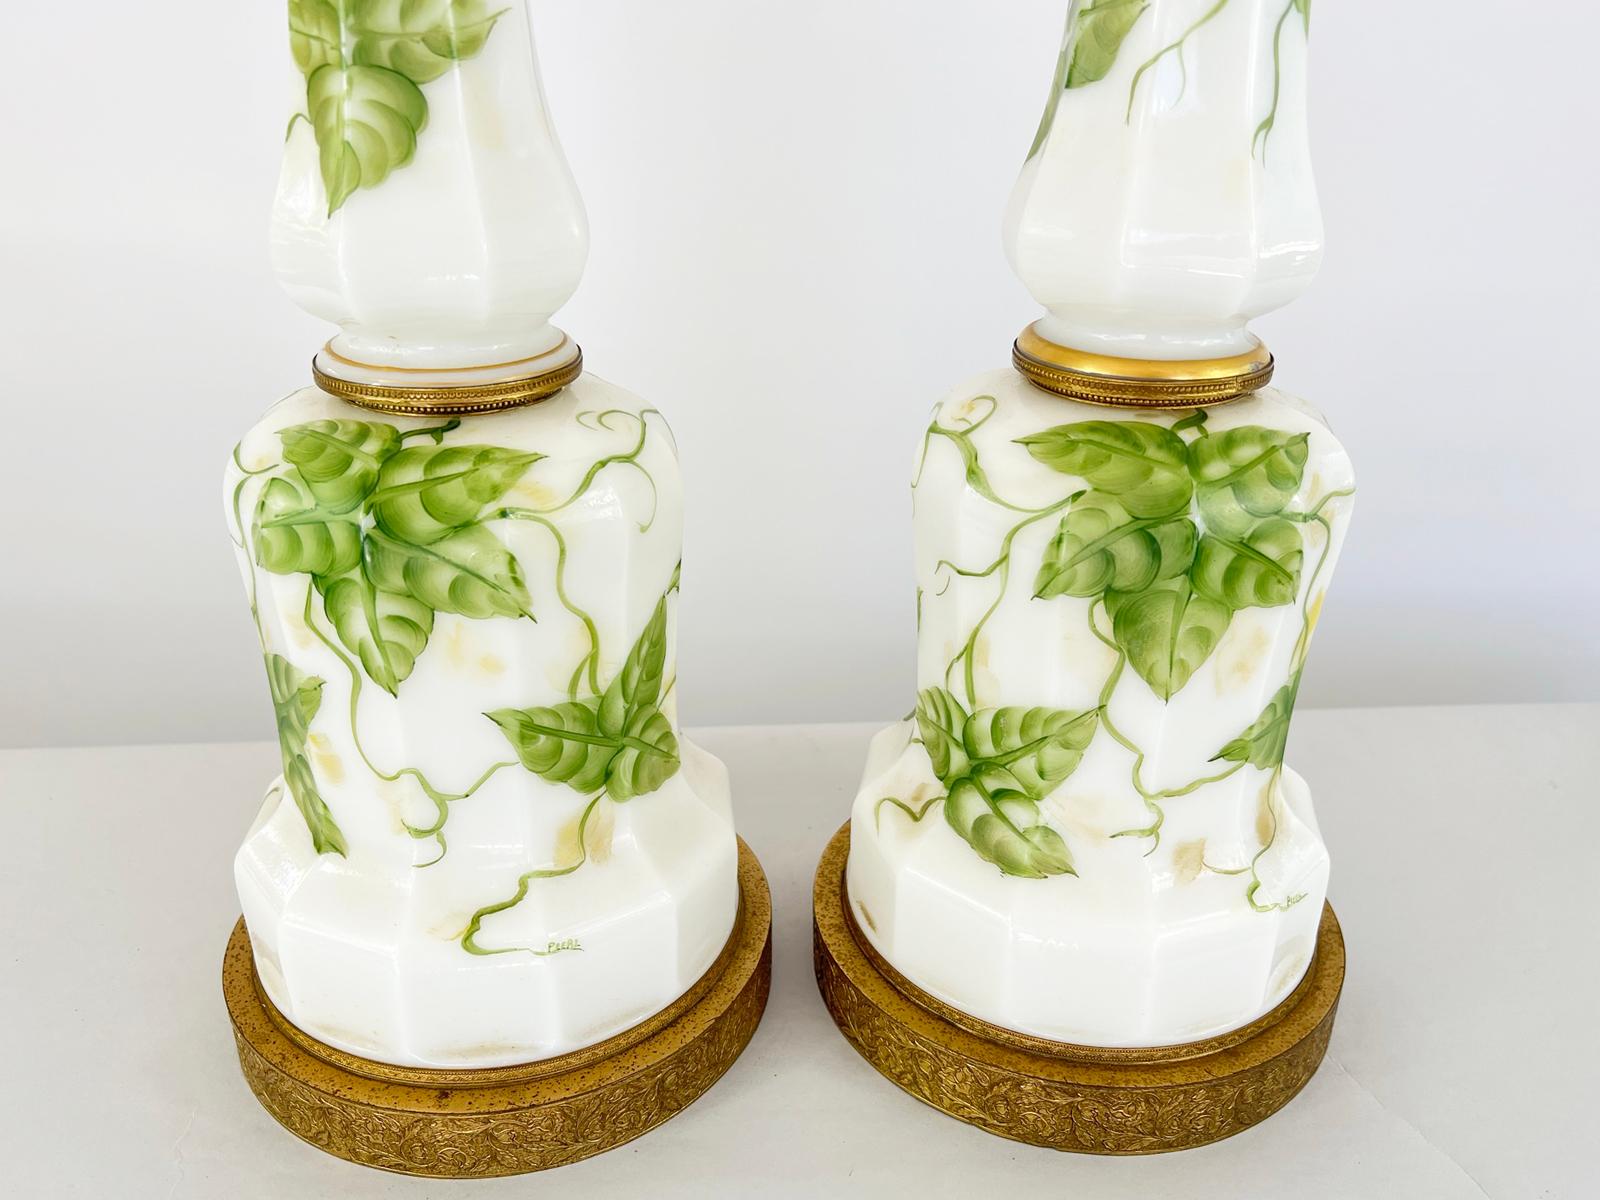 European Pair of Signed, 19th Century, Converted Milkglass Lamps Hand Painted with Ivy For Sale